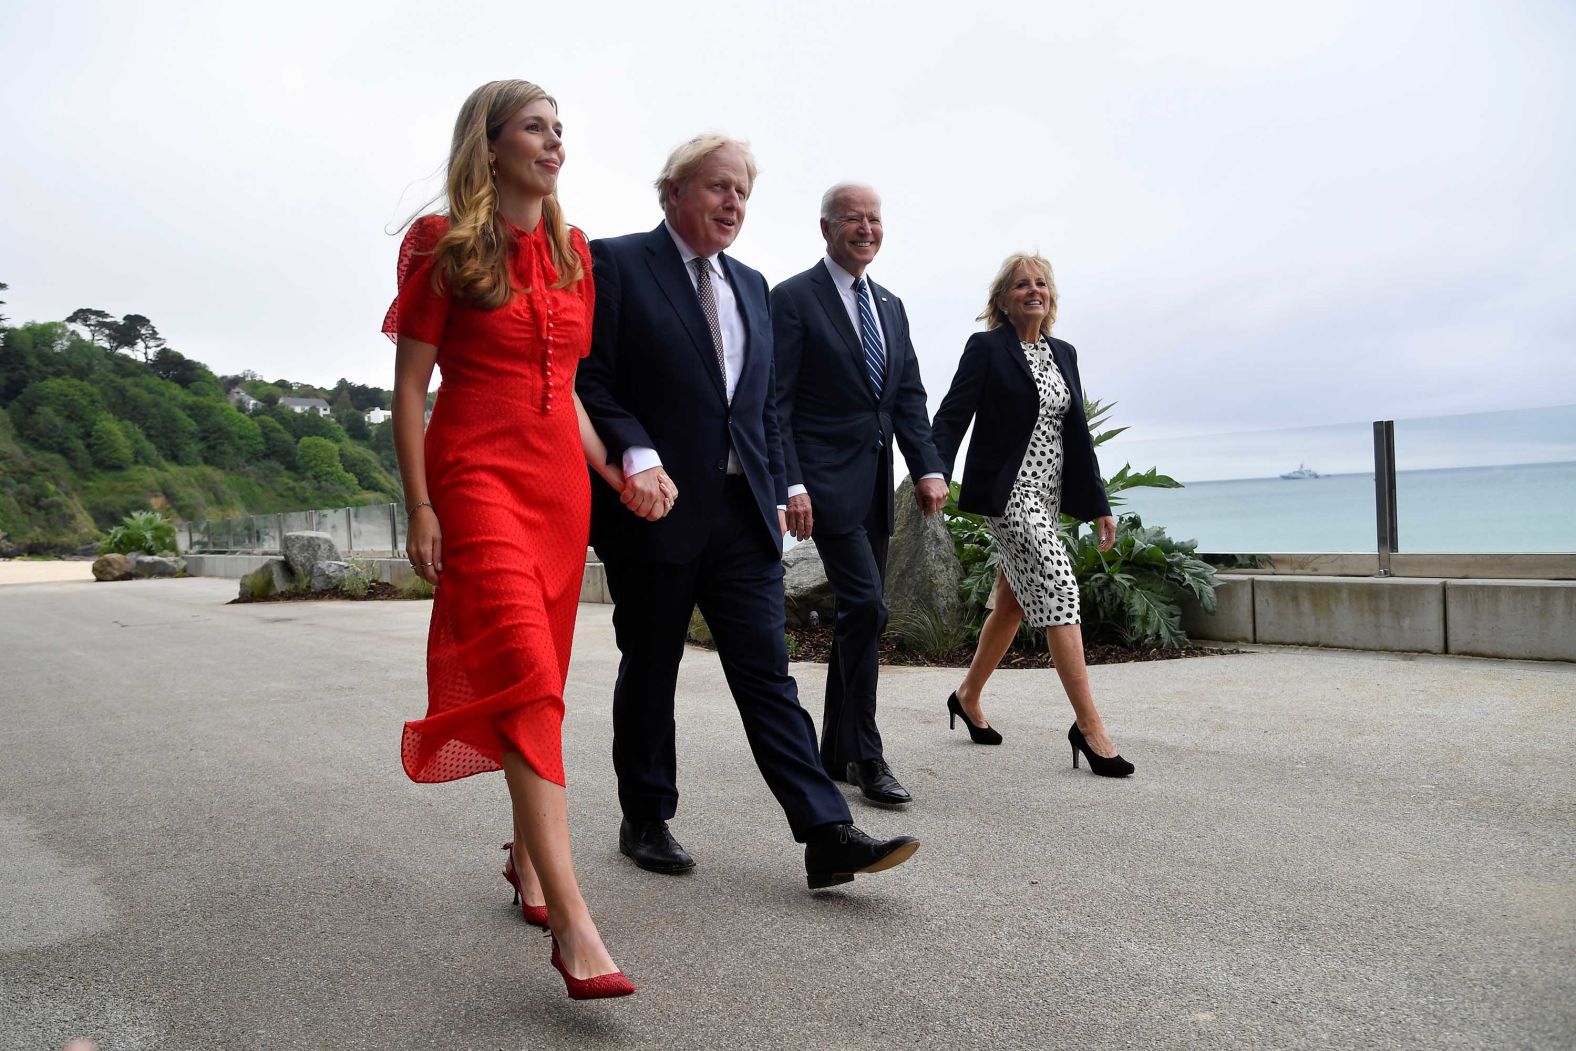 The Bidens walk with Johnson and his wife, Carrie, outside Carbis Bay on Thursday. The Johnsons <a href="index.php?page=&url=https%3A%2F%2Fwww.cnn.com%2F2021%2F05%2F29%2Fworld%2Fboris-johnson-marries-carrie-symonds-intl%2Findex.html" target="_blank">were married last month.</a>